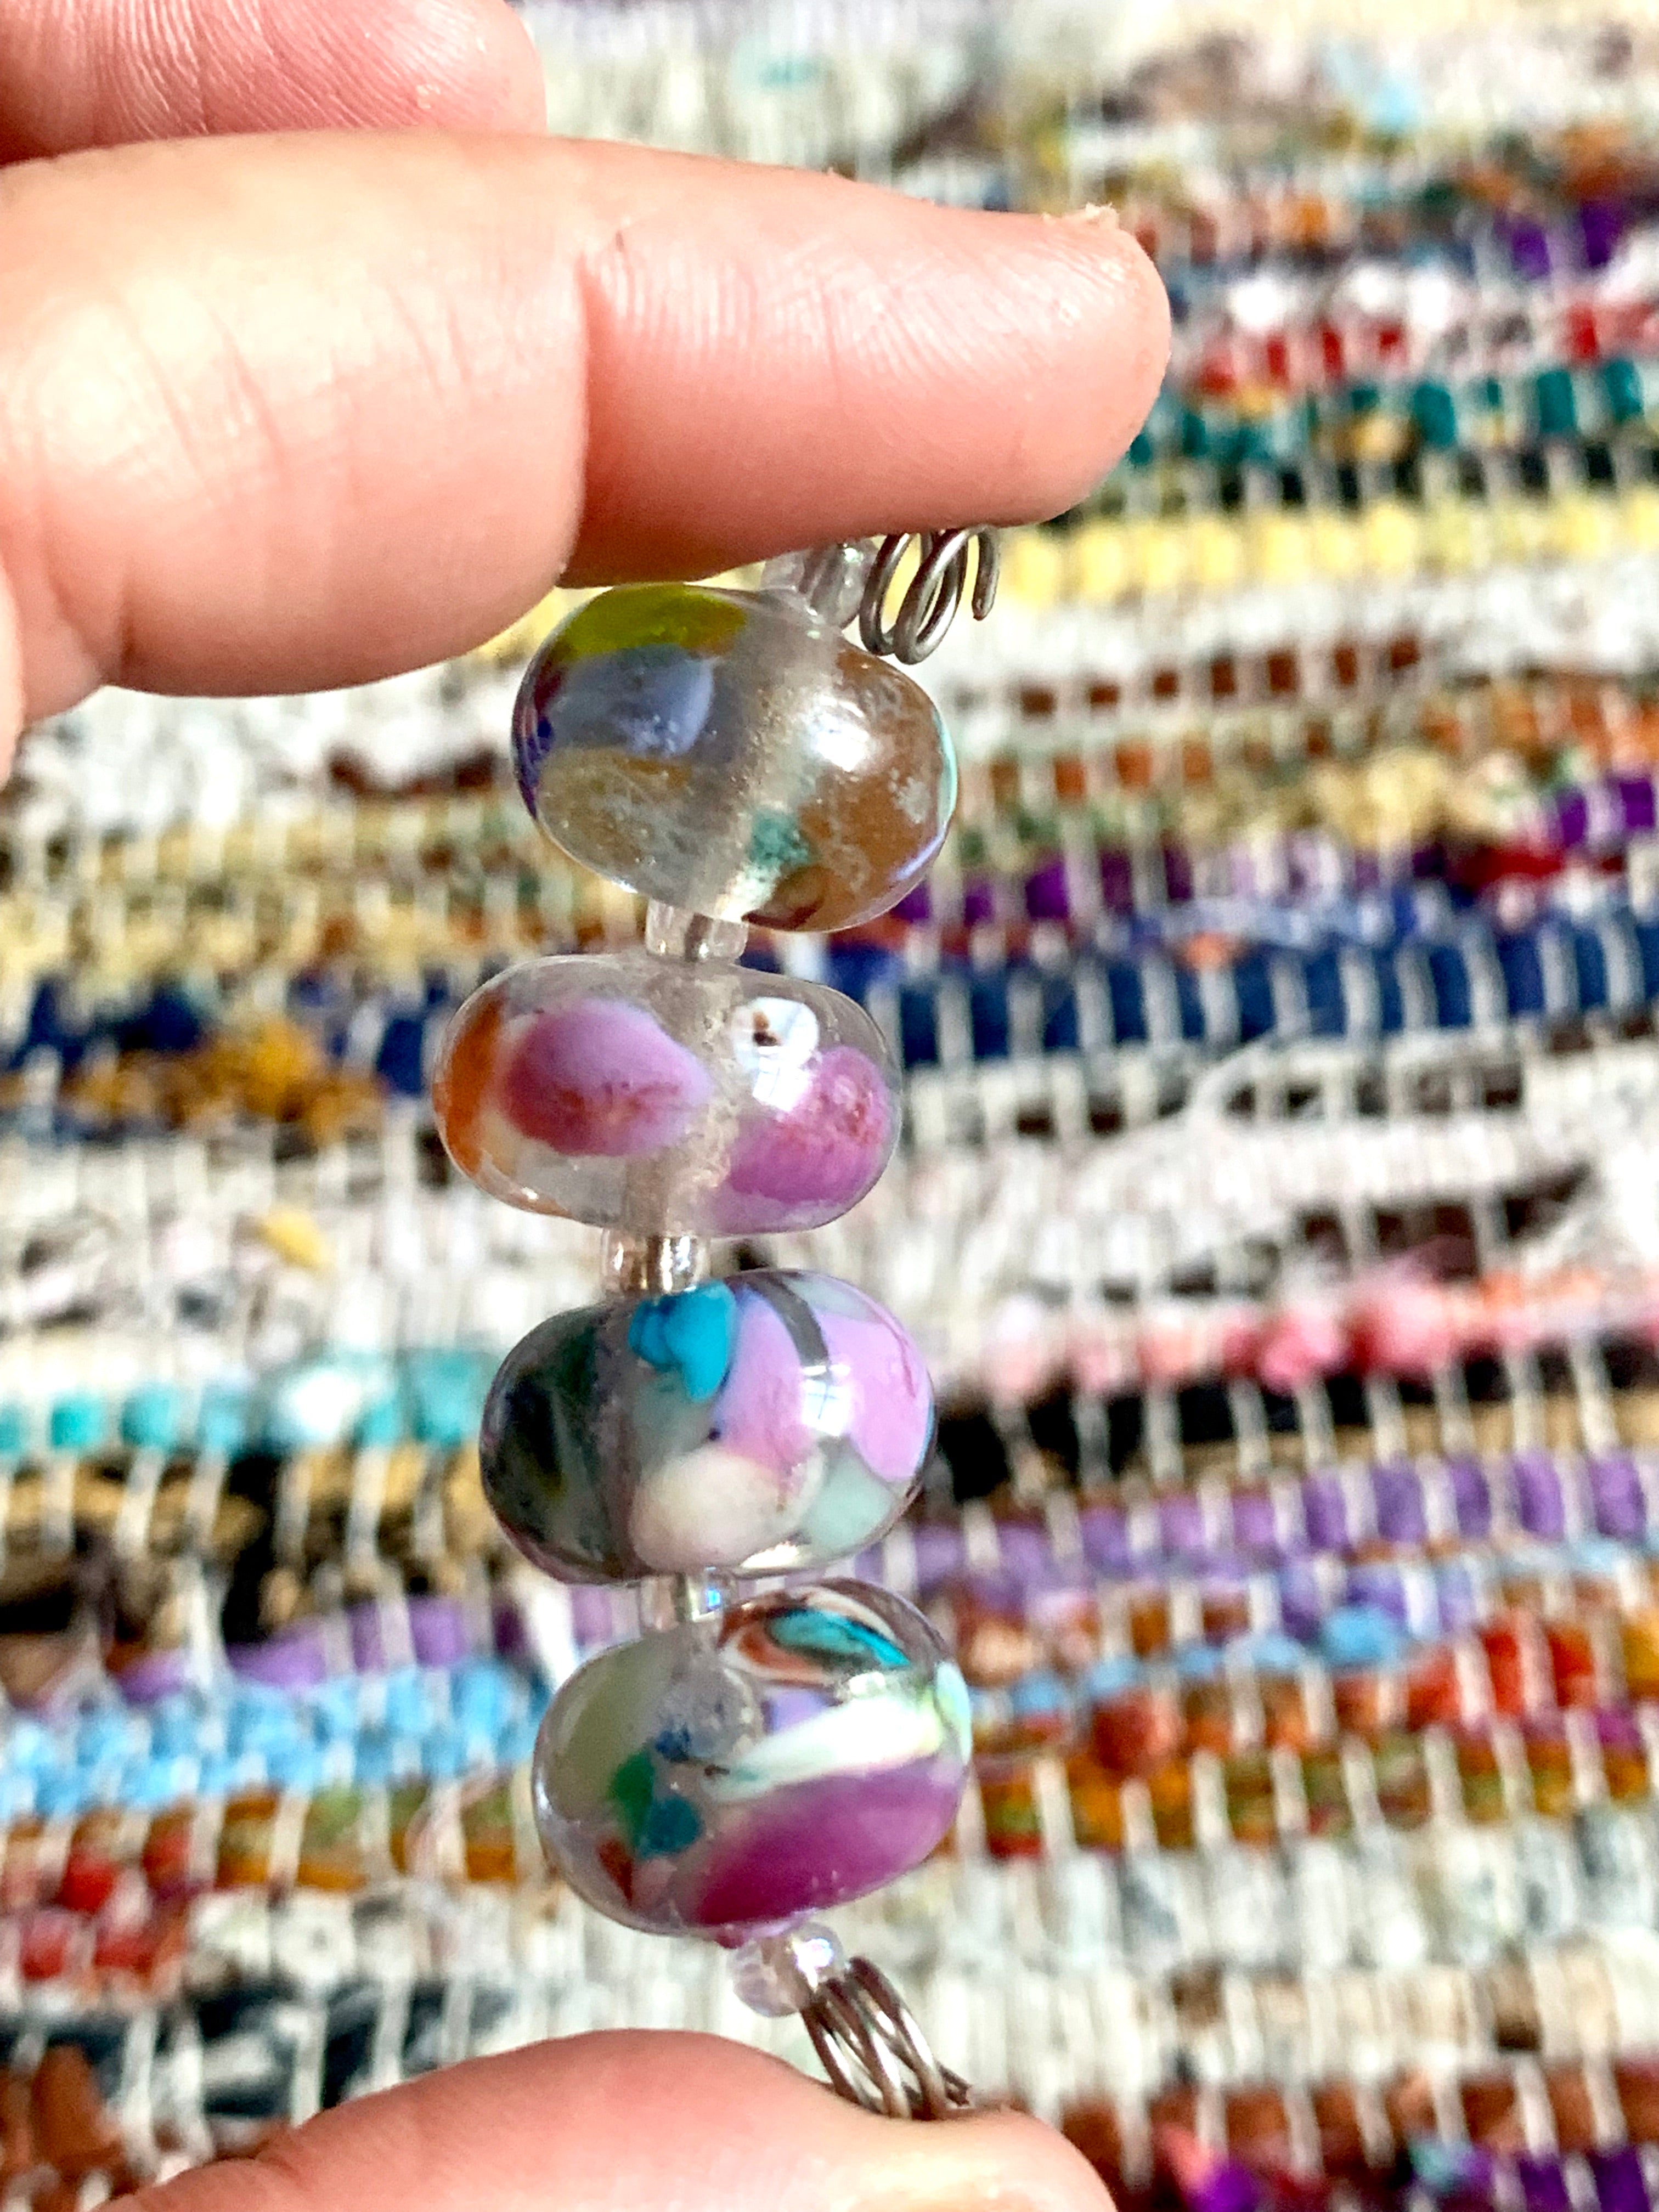 Set of 4 “watercolor” glass beads with brightly colored spots and swirls